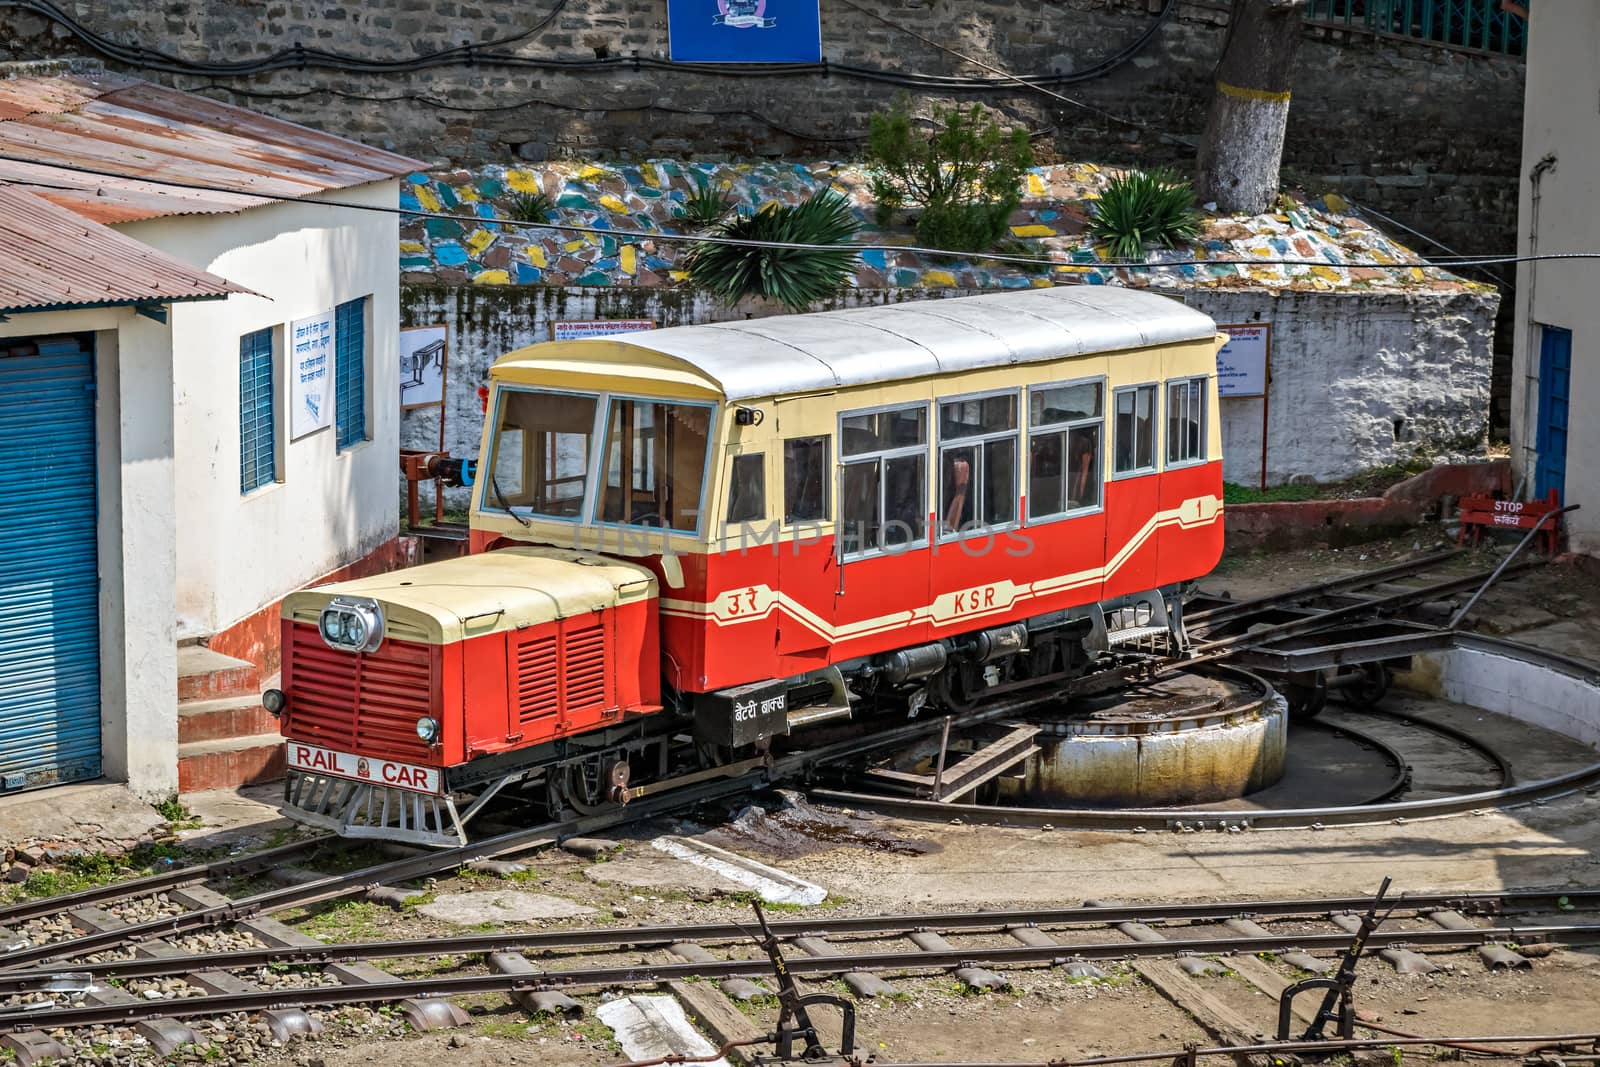 Shimla, Himachal Pradesh, India- April 15th, 2015: Narrow gauge, self propelled, rail car resting on a turn table after its uphill trip from Kalka.